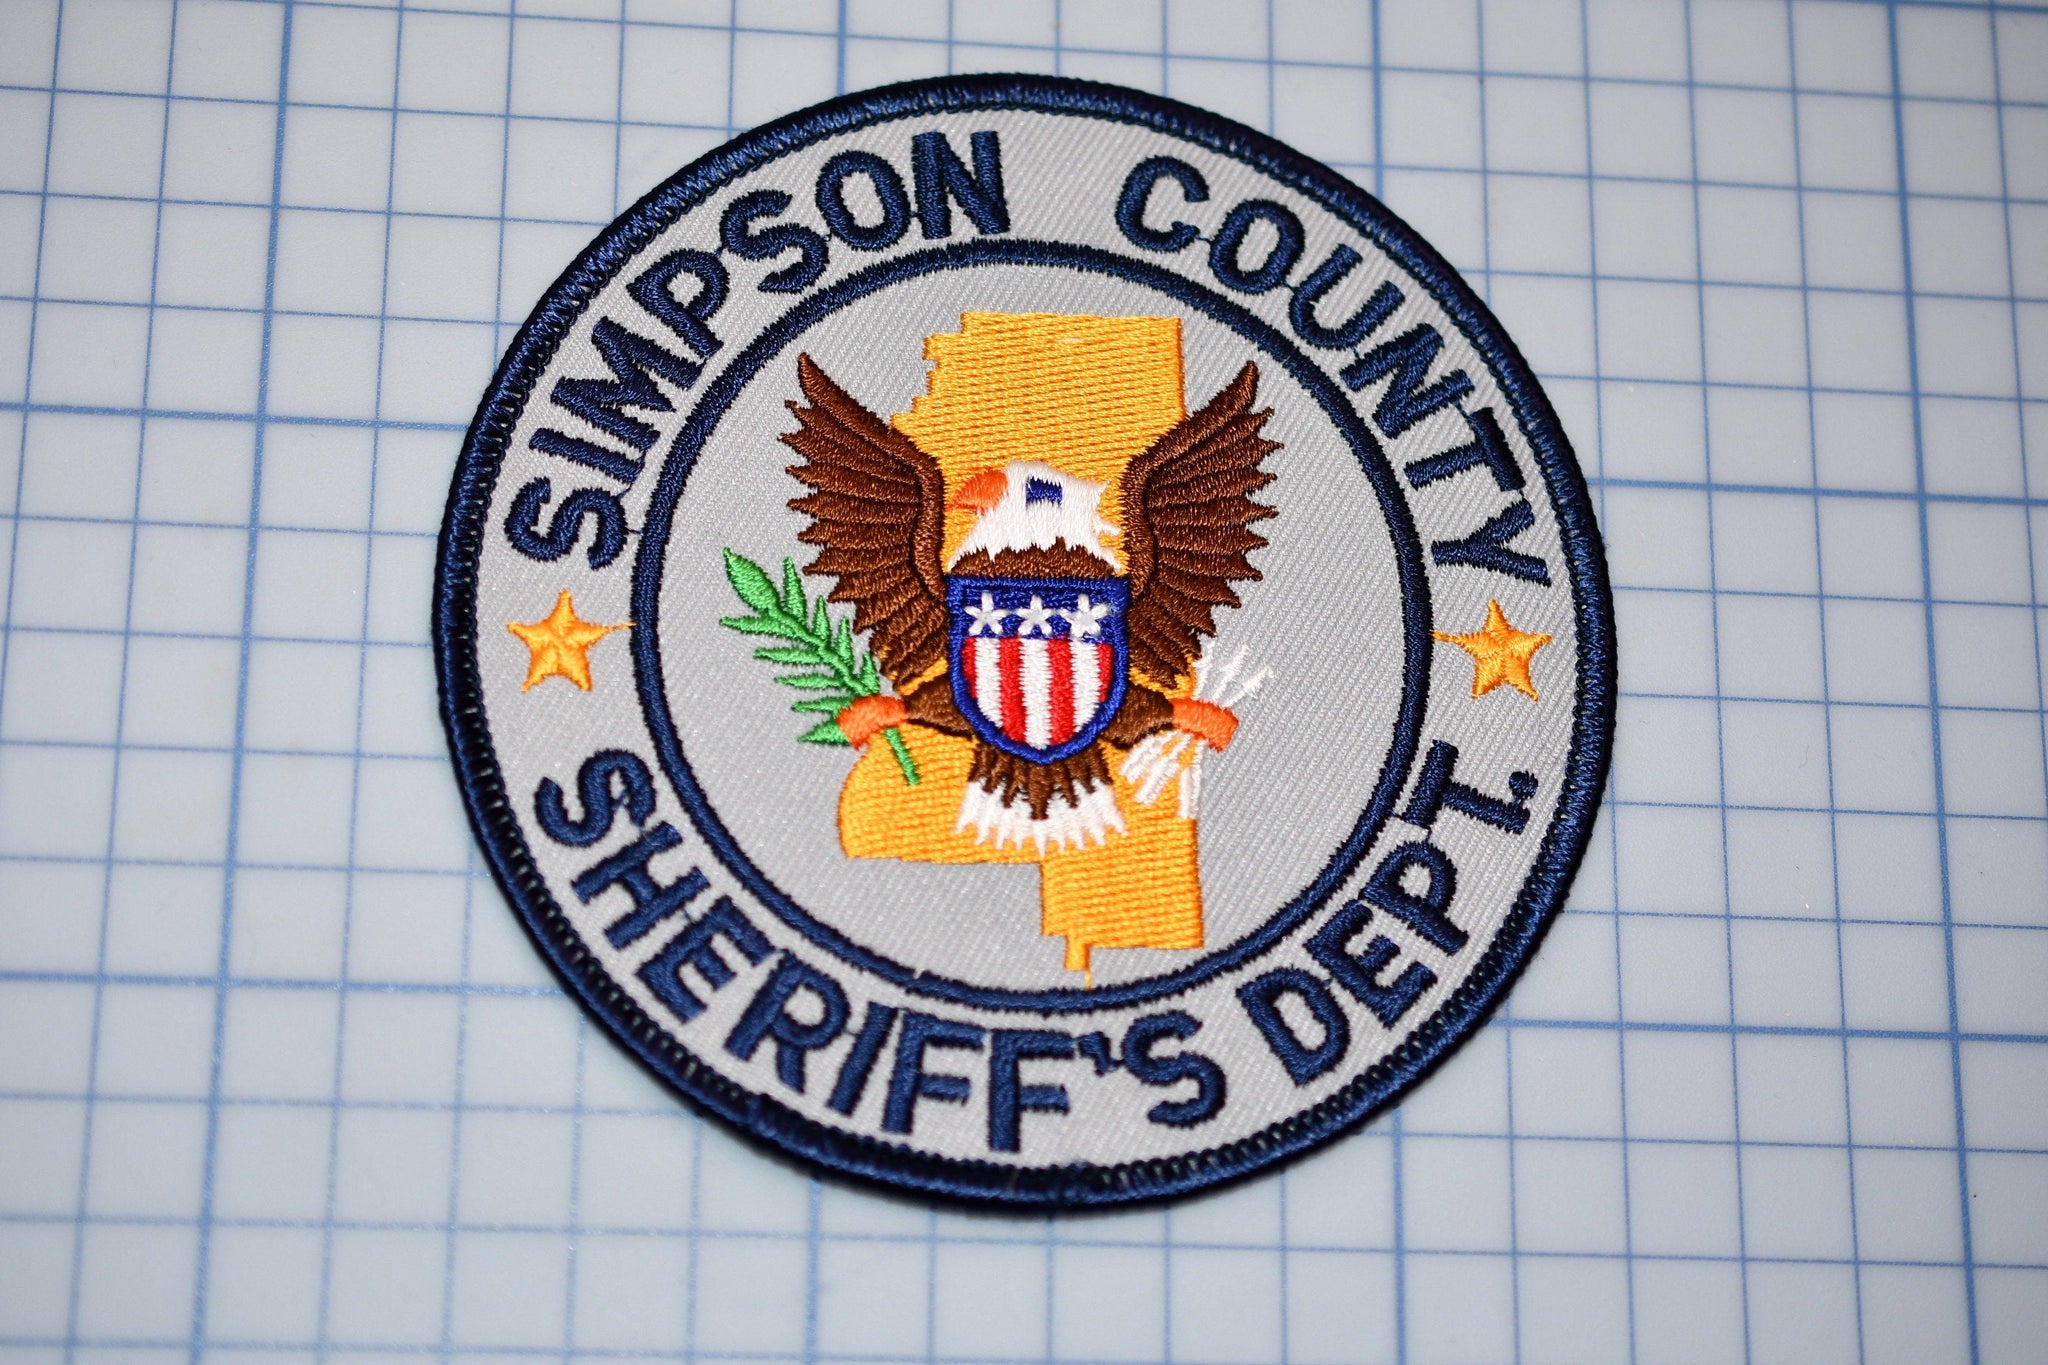 Simpson County Mississippi Sheriff's Department Patch (B23-336)